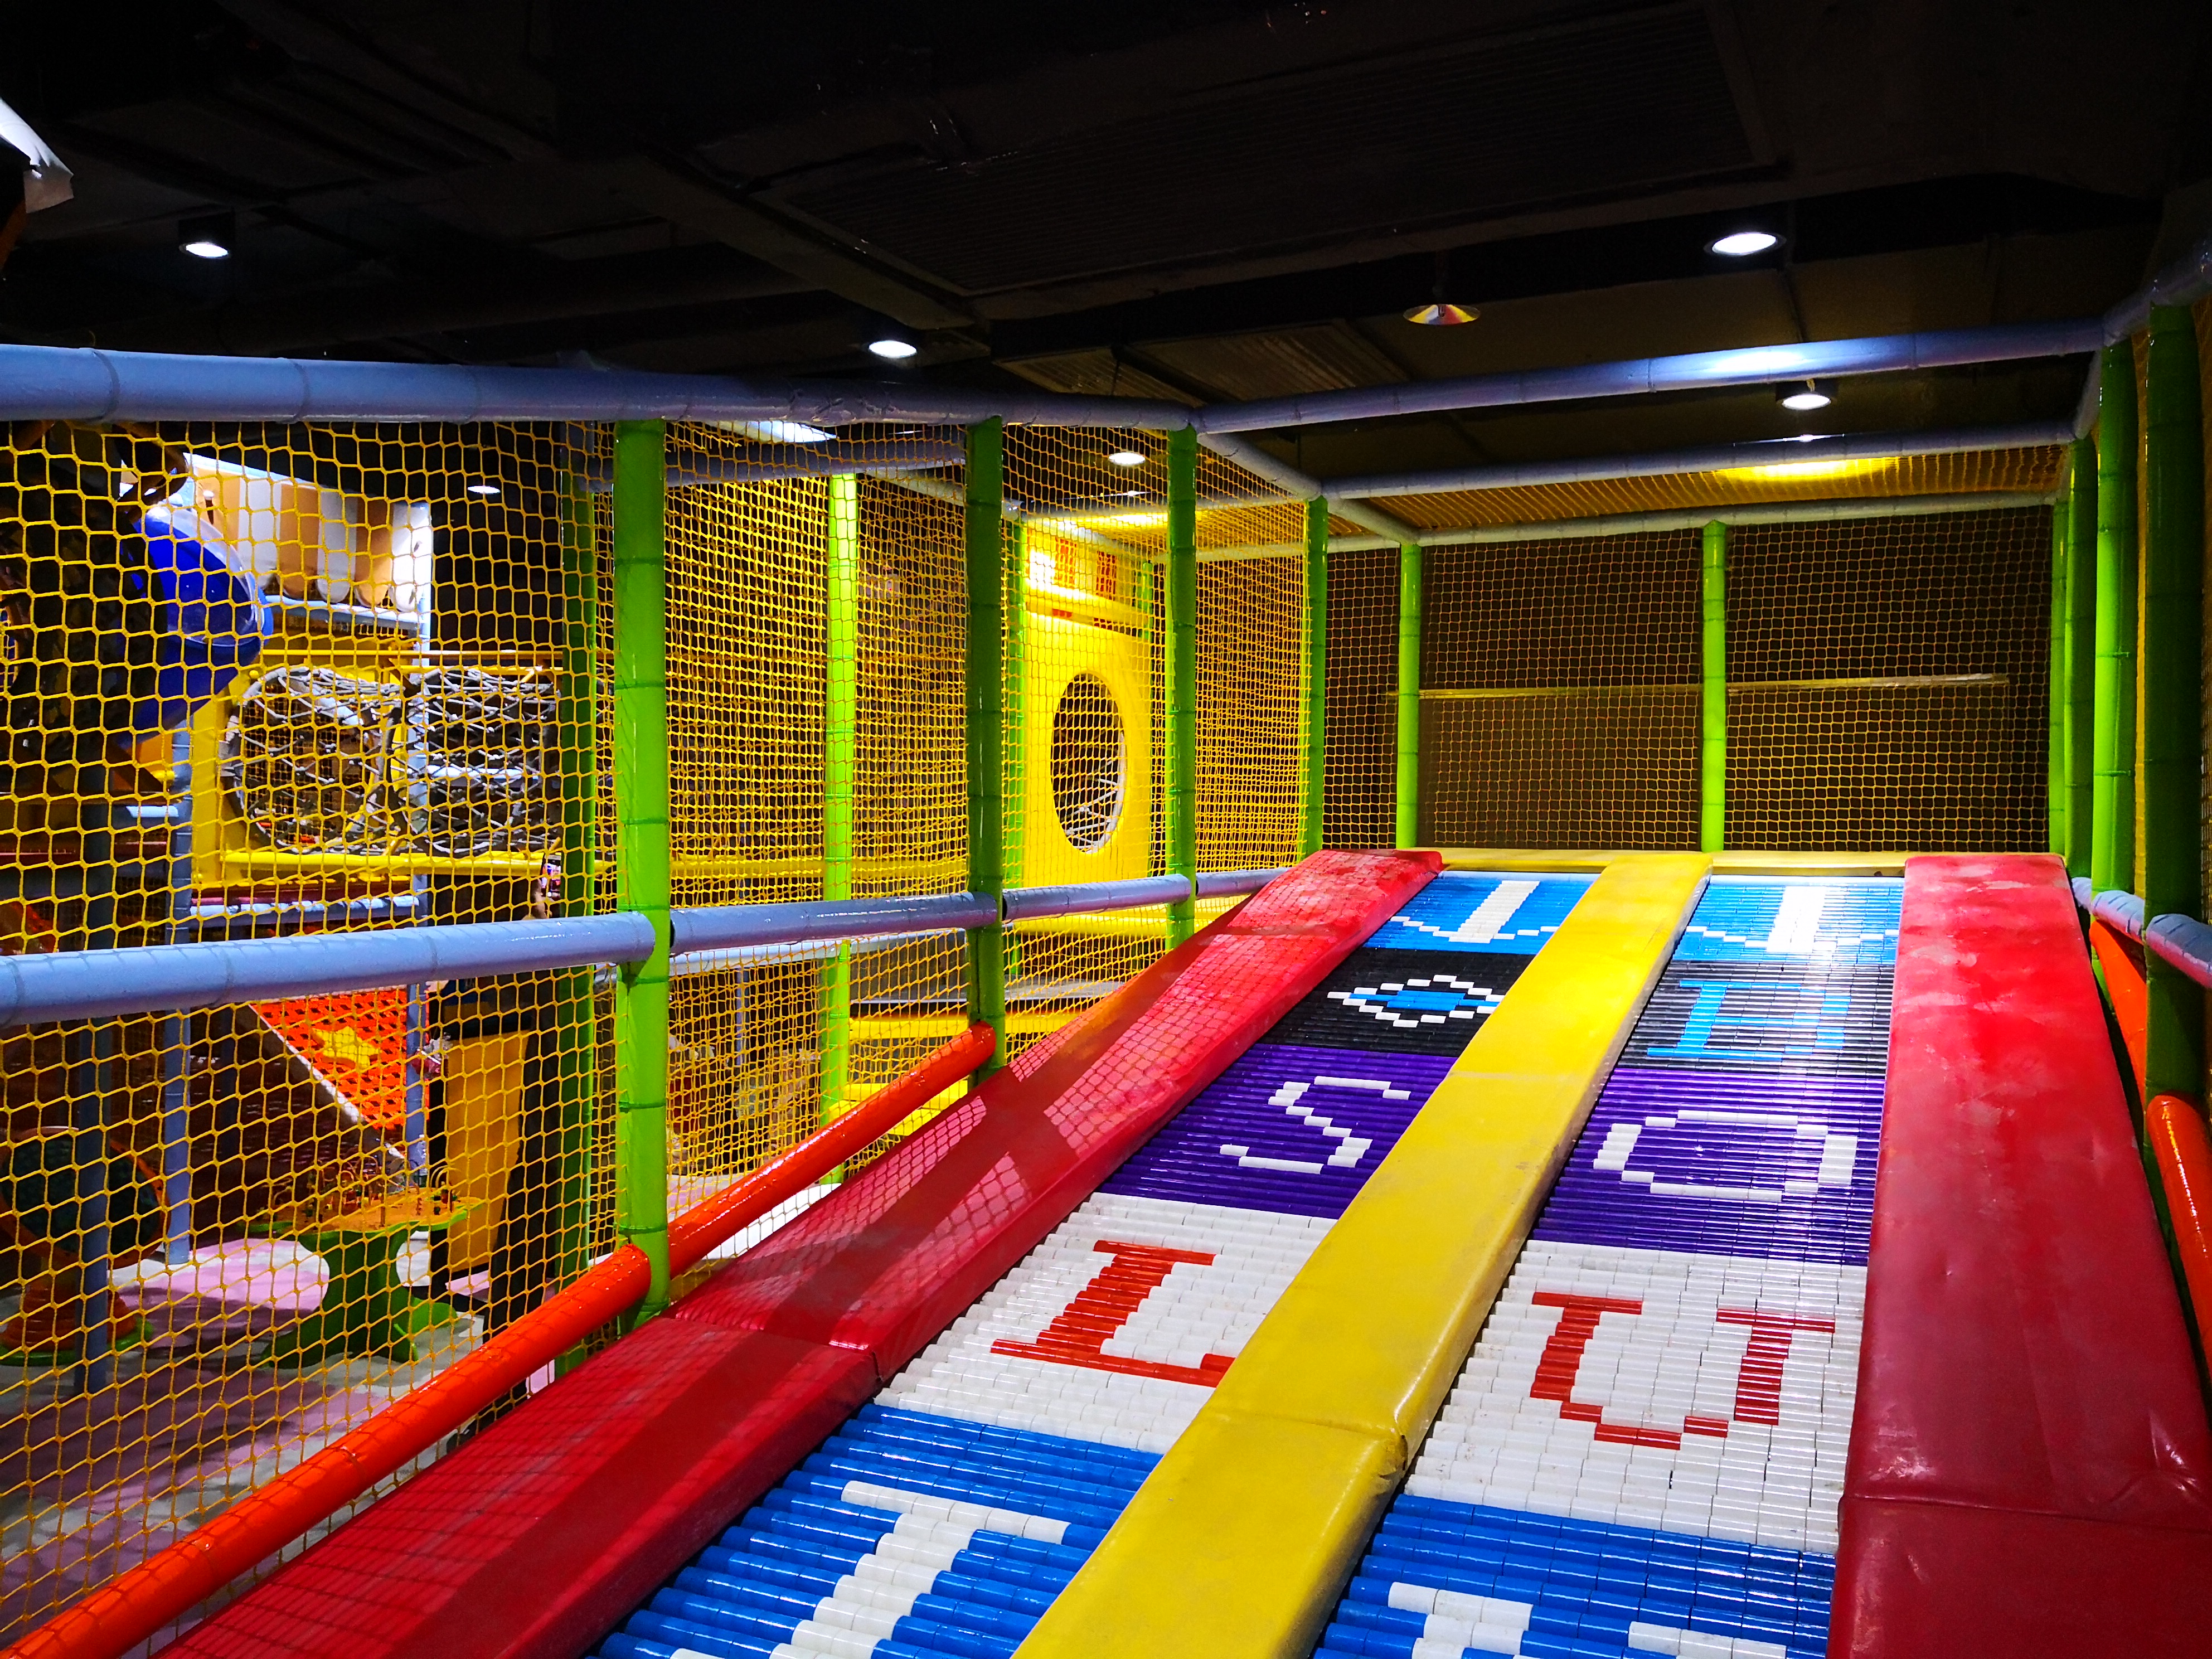 What Are the Requirements for Qualified Indoor Playground Equipment for Children? How to Choose?